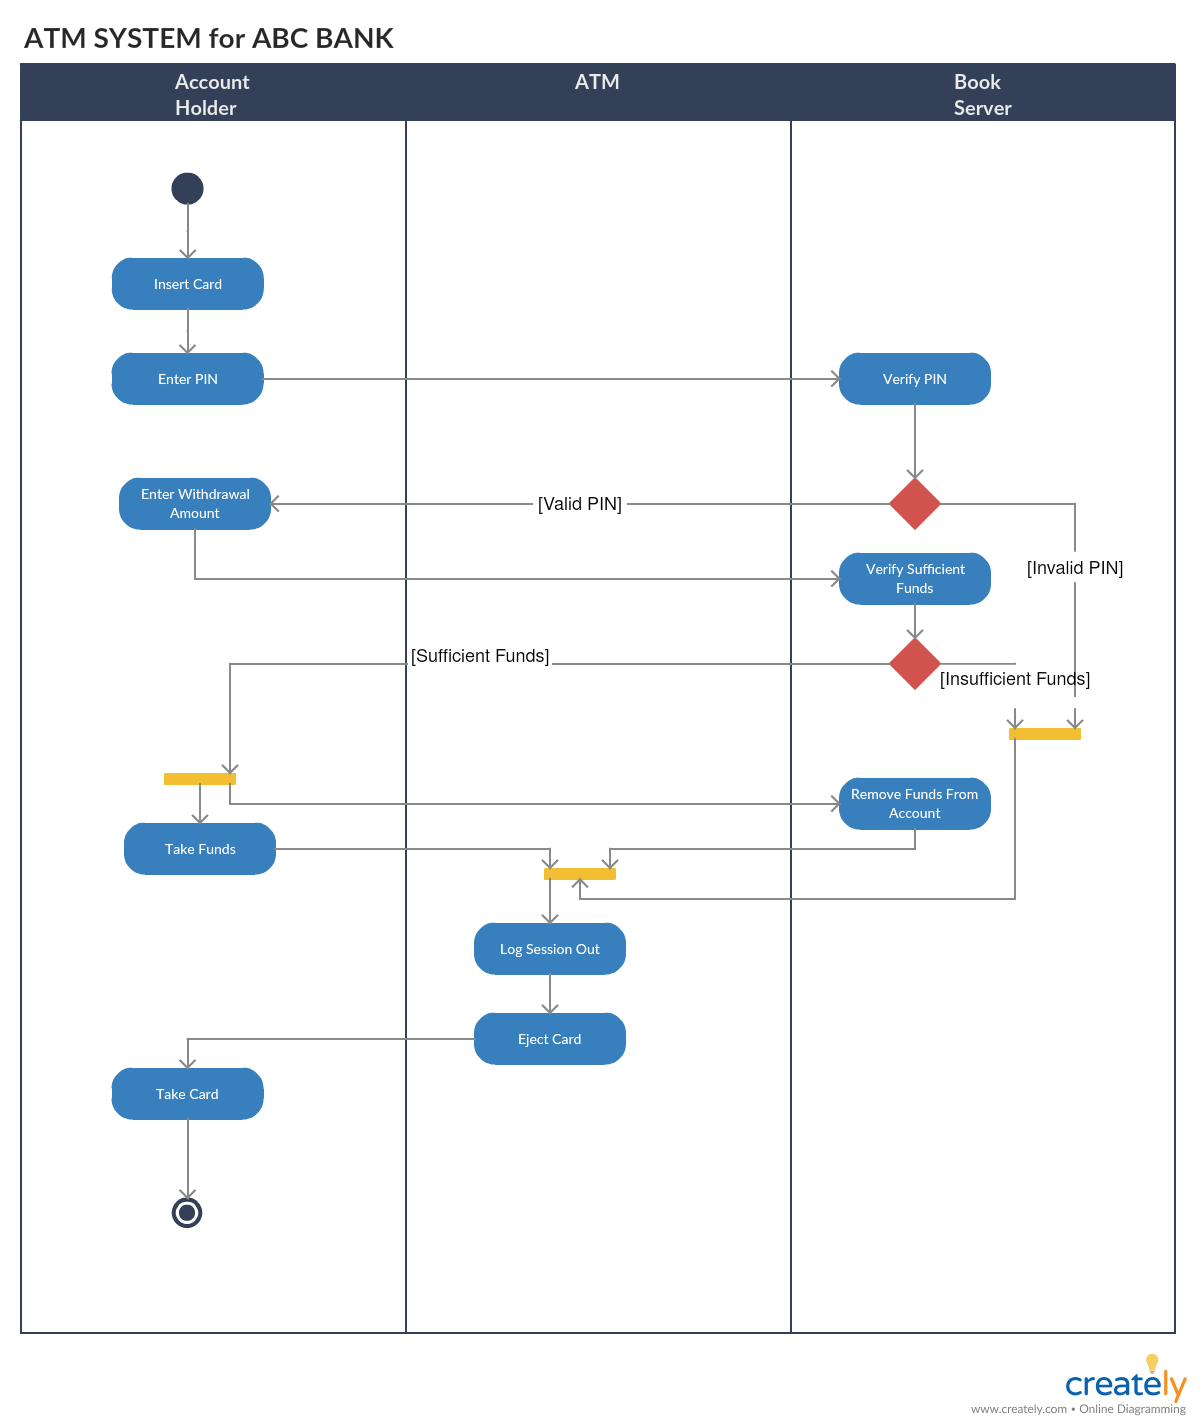 Activity Diagram: Components, Notations, and Uses. - Mir Imad